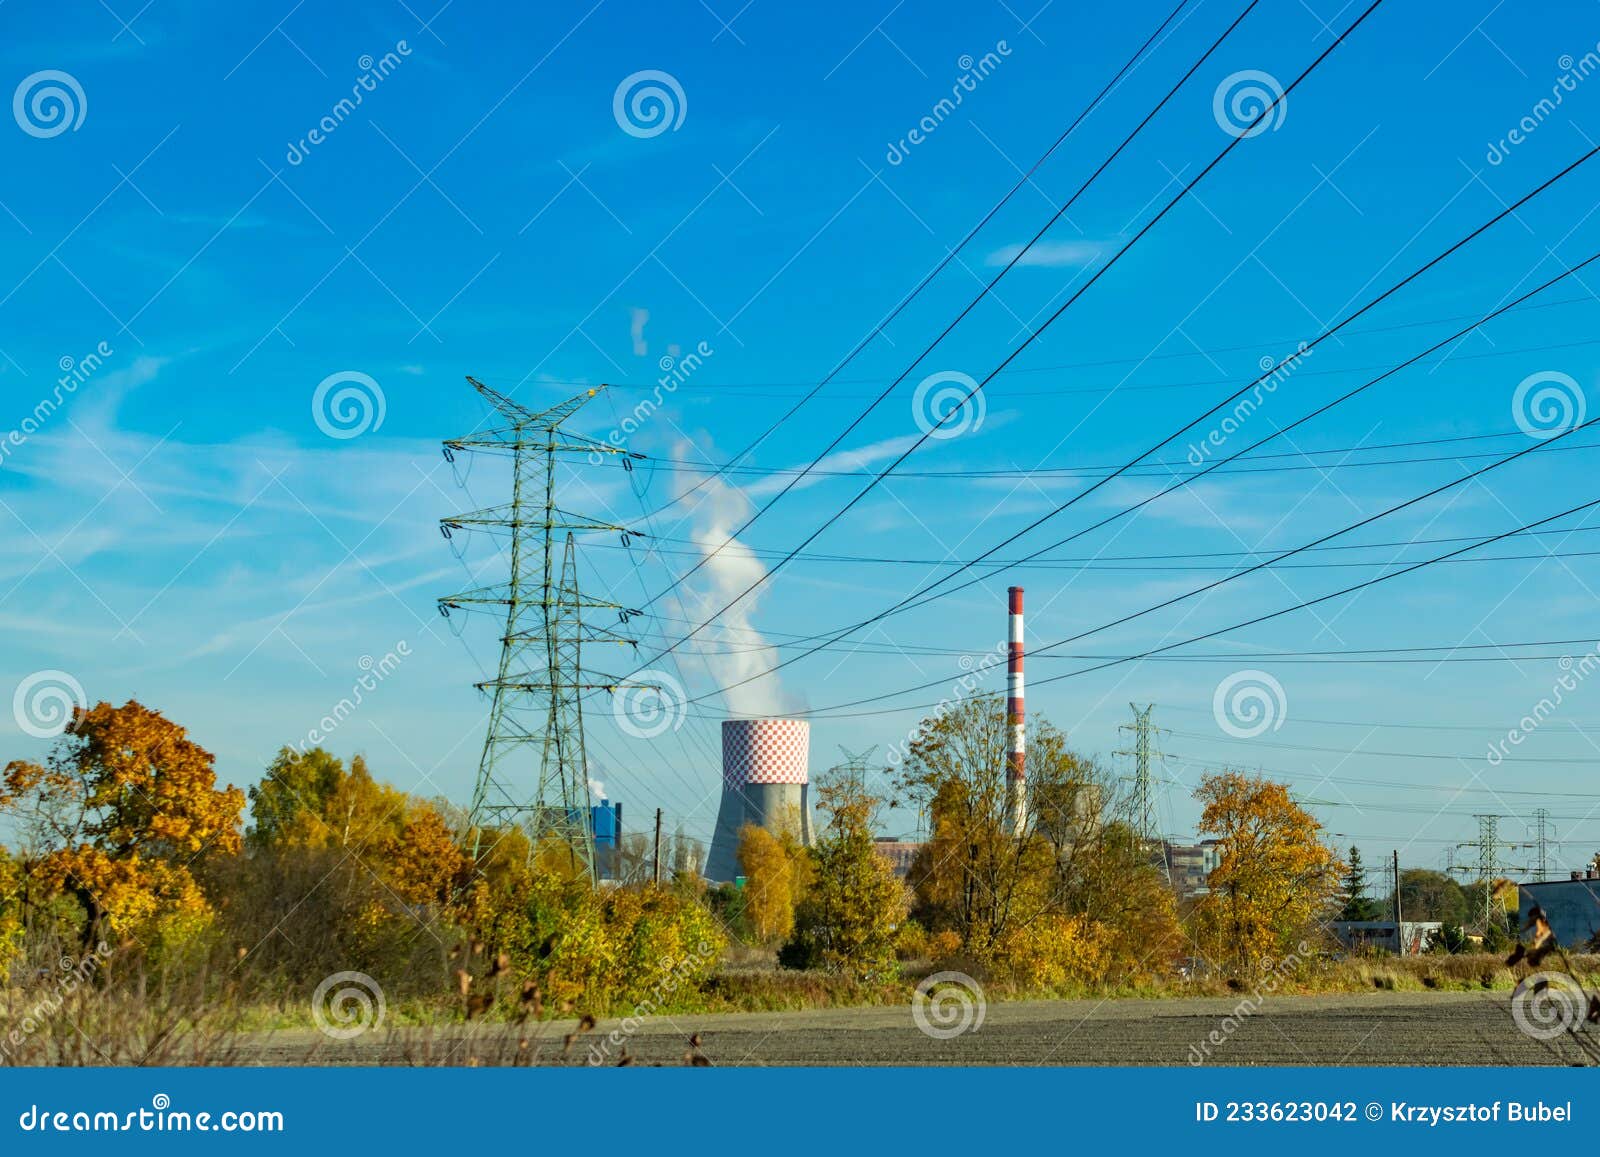 coal power plant on a sunny day